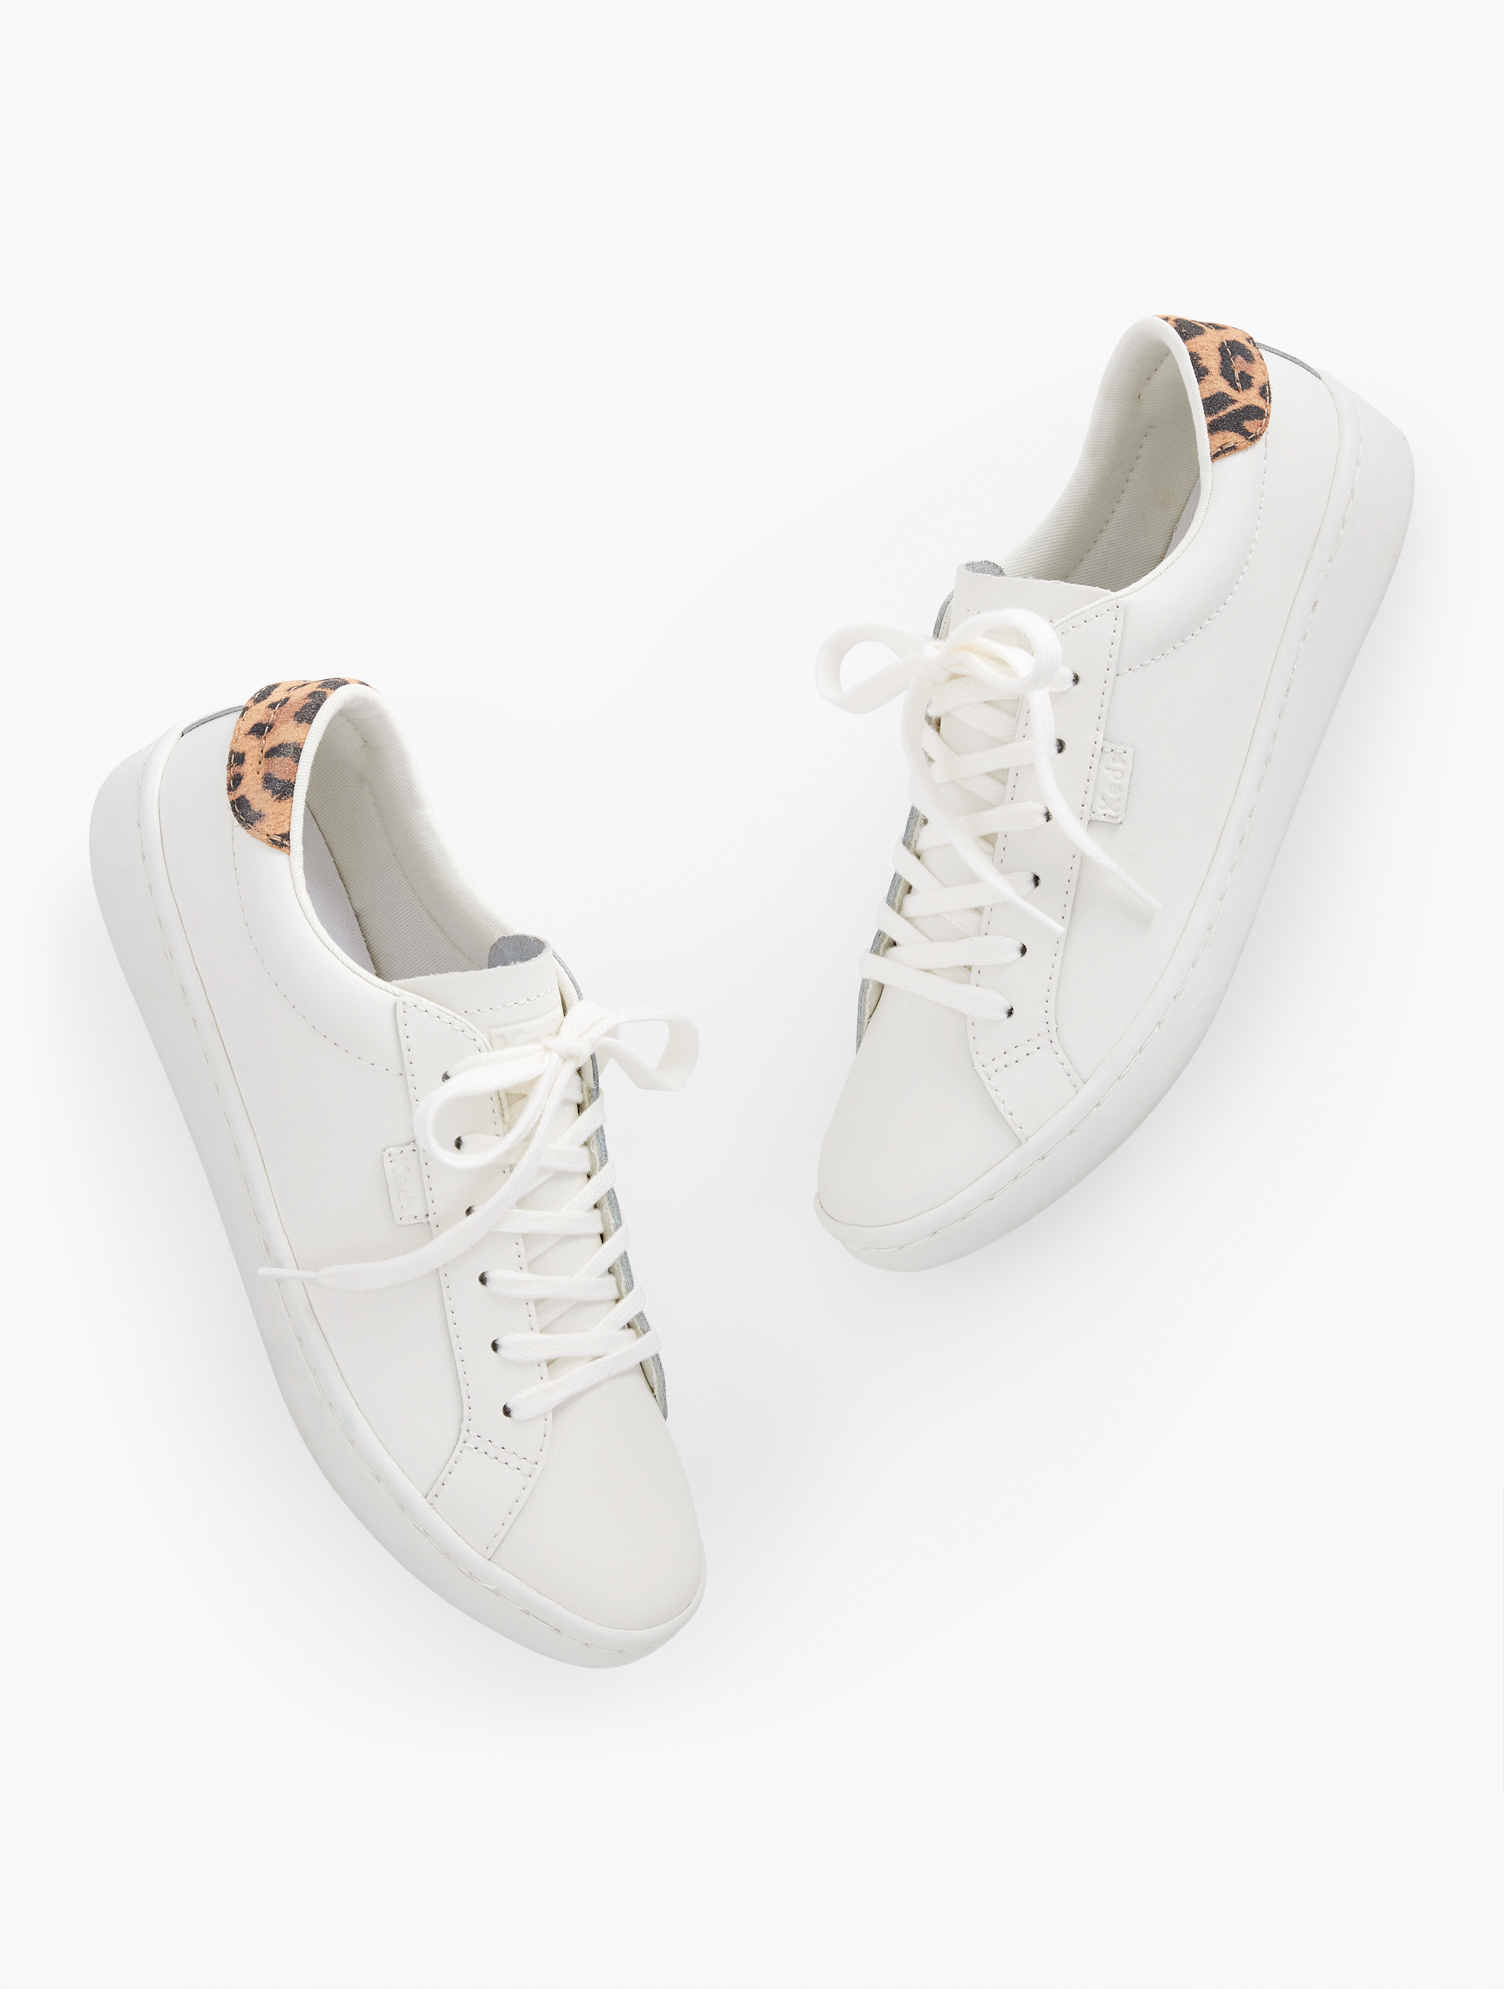 KEDS Â® ACE LEATHER SNEAKERS - WHITE/TAN - 8M TALBOTS